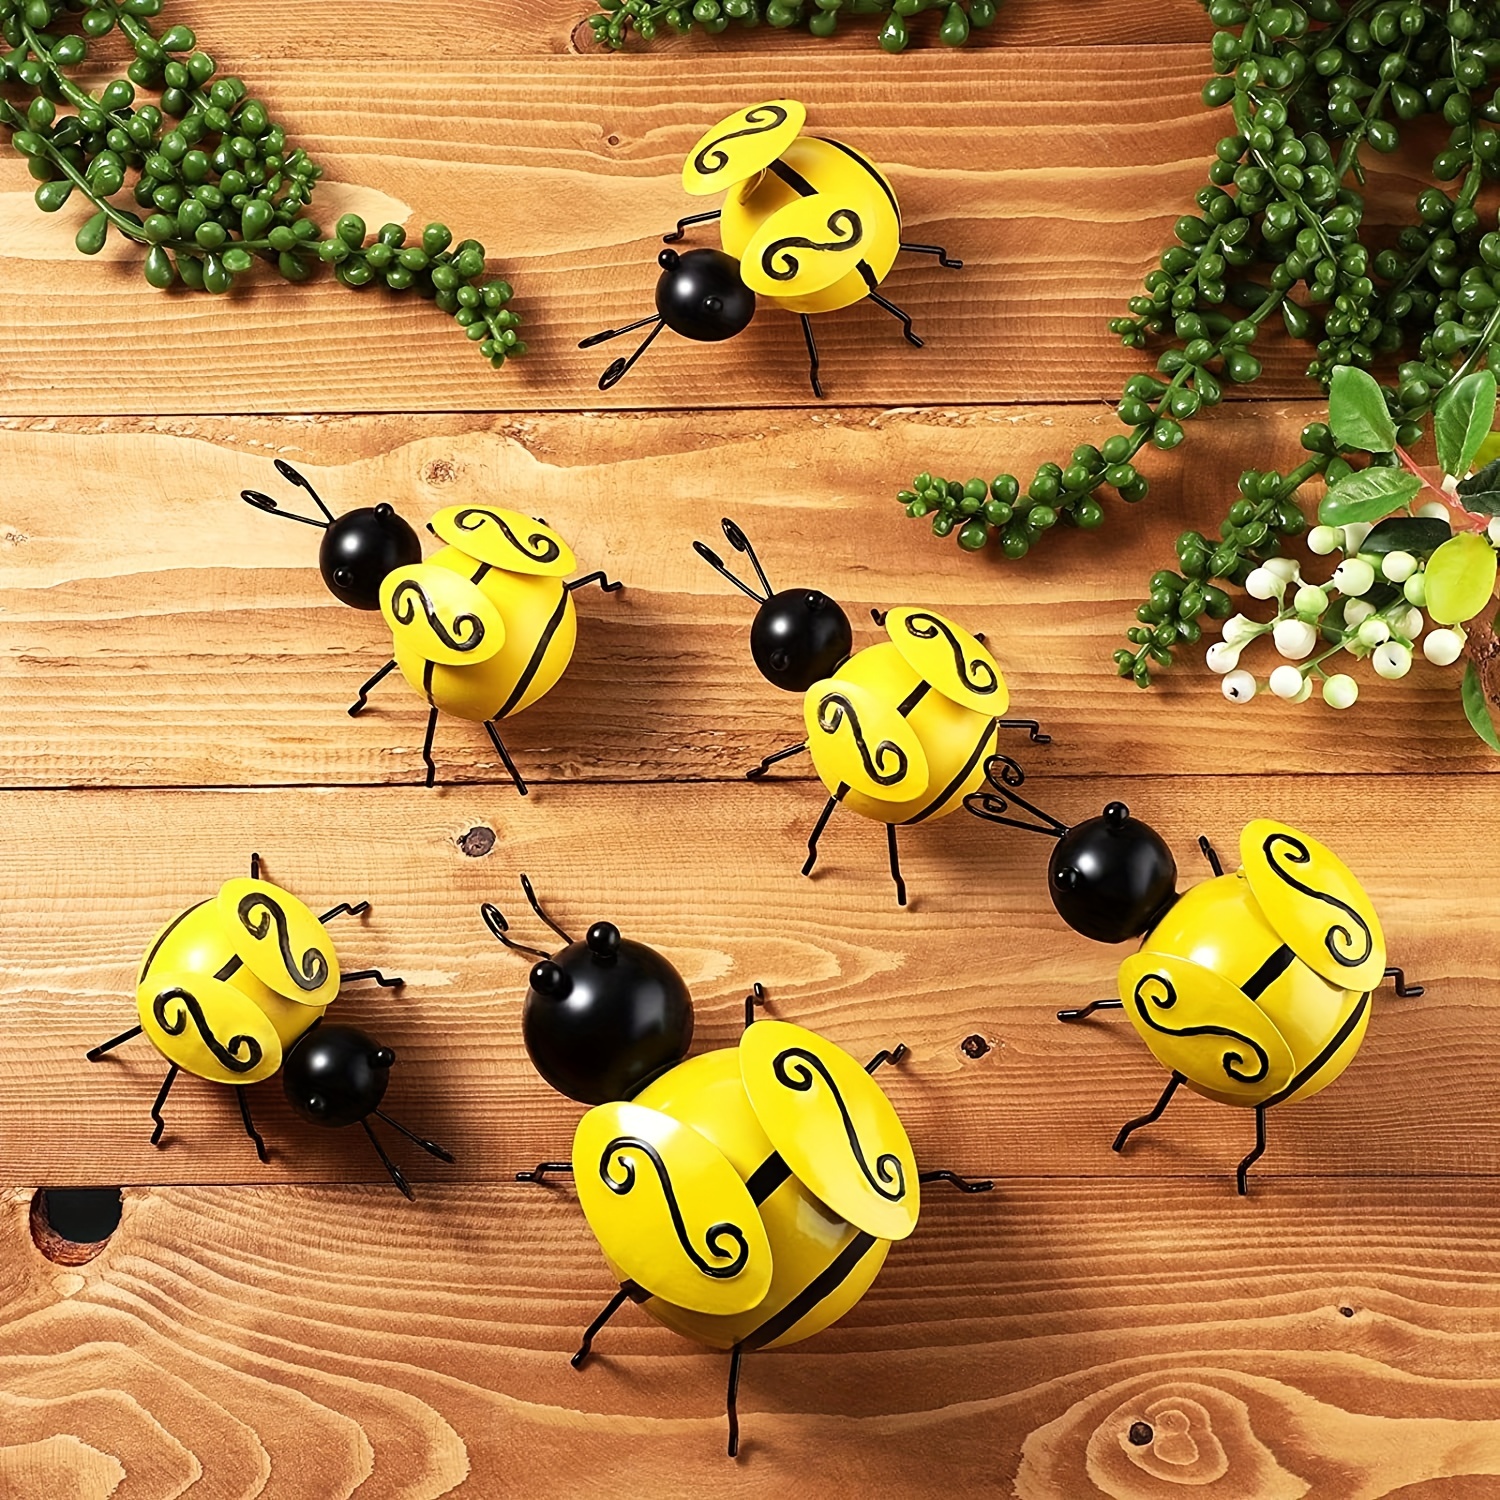 Decorative Metal Bumble Bee Garden Accents - Lawn Ornaments - Set of 4